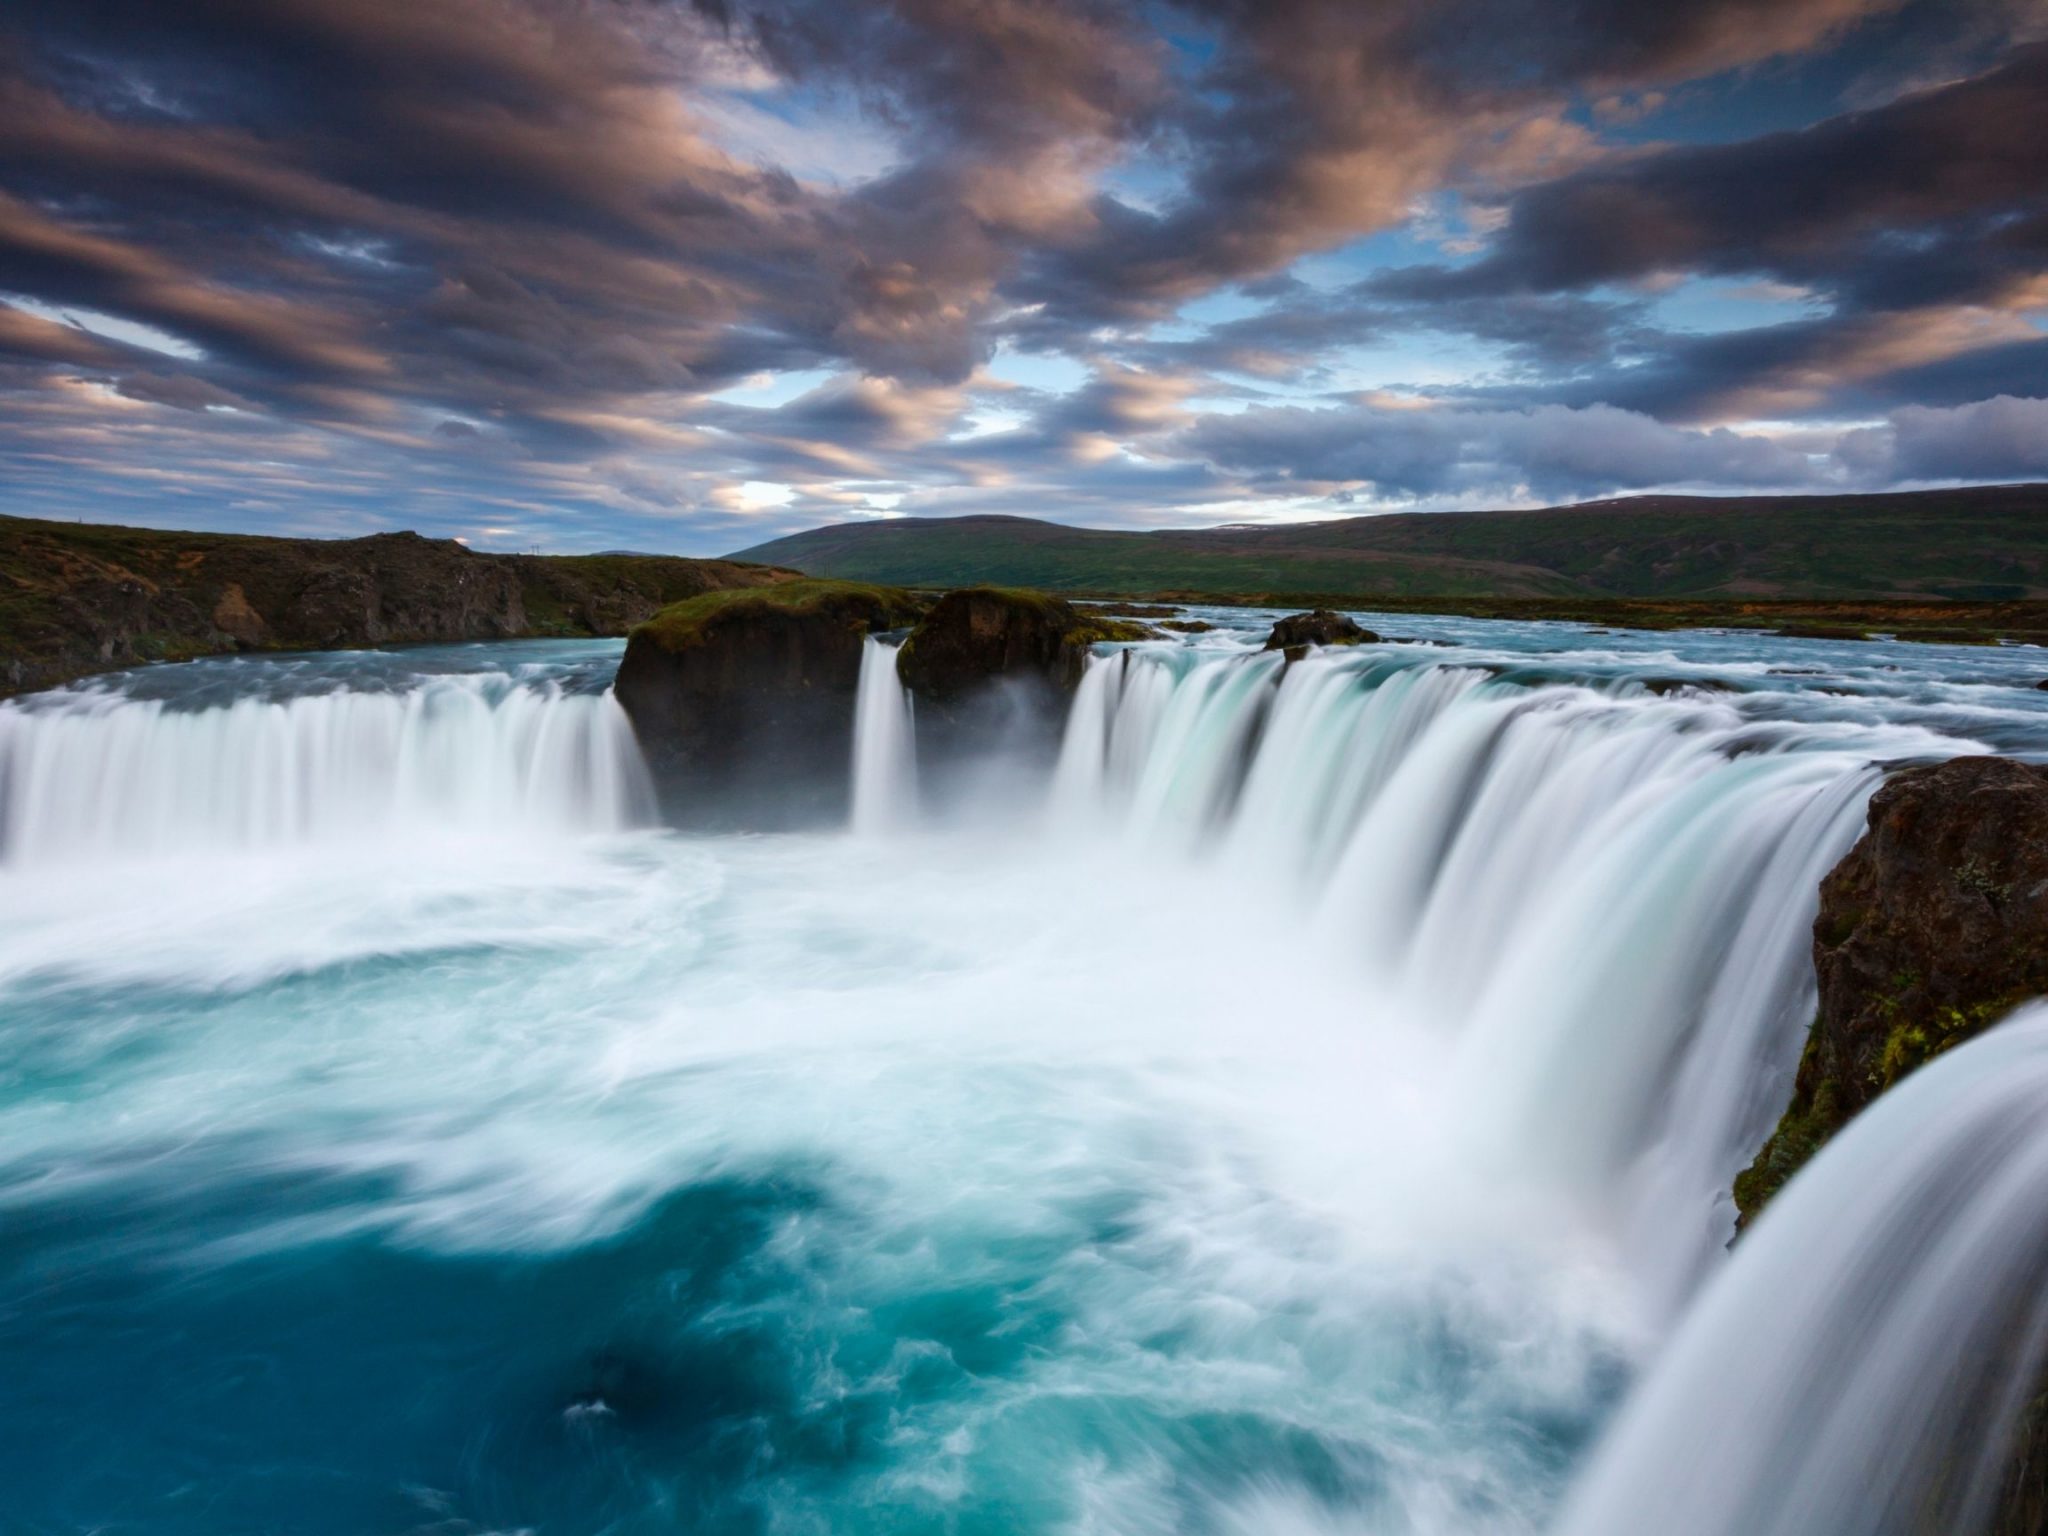 200+ AMAZING Waterfall Quotes & Captions to Inspire You